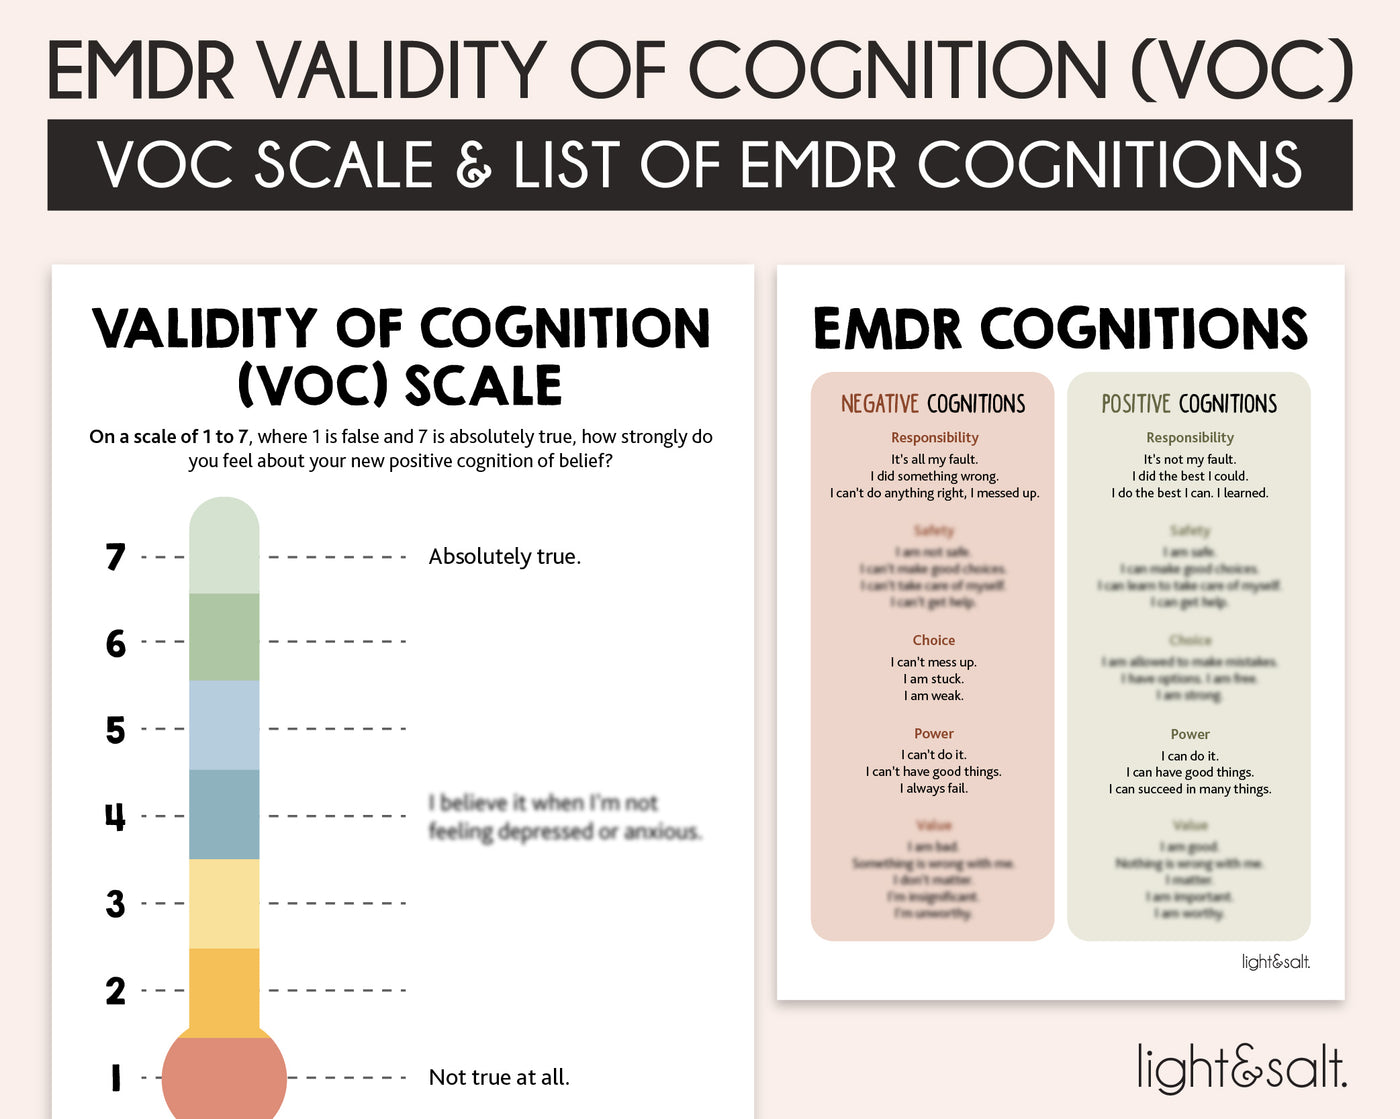 EMDR cognitions, validity of cognition scale